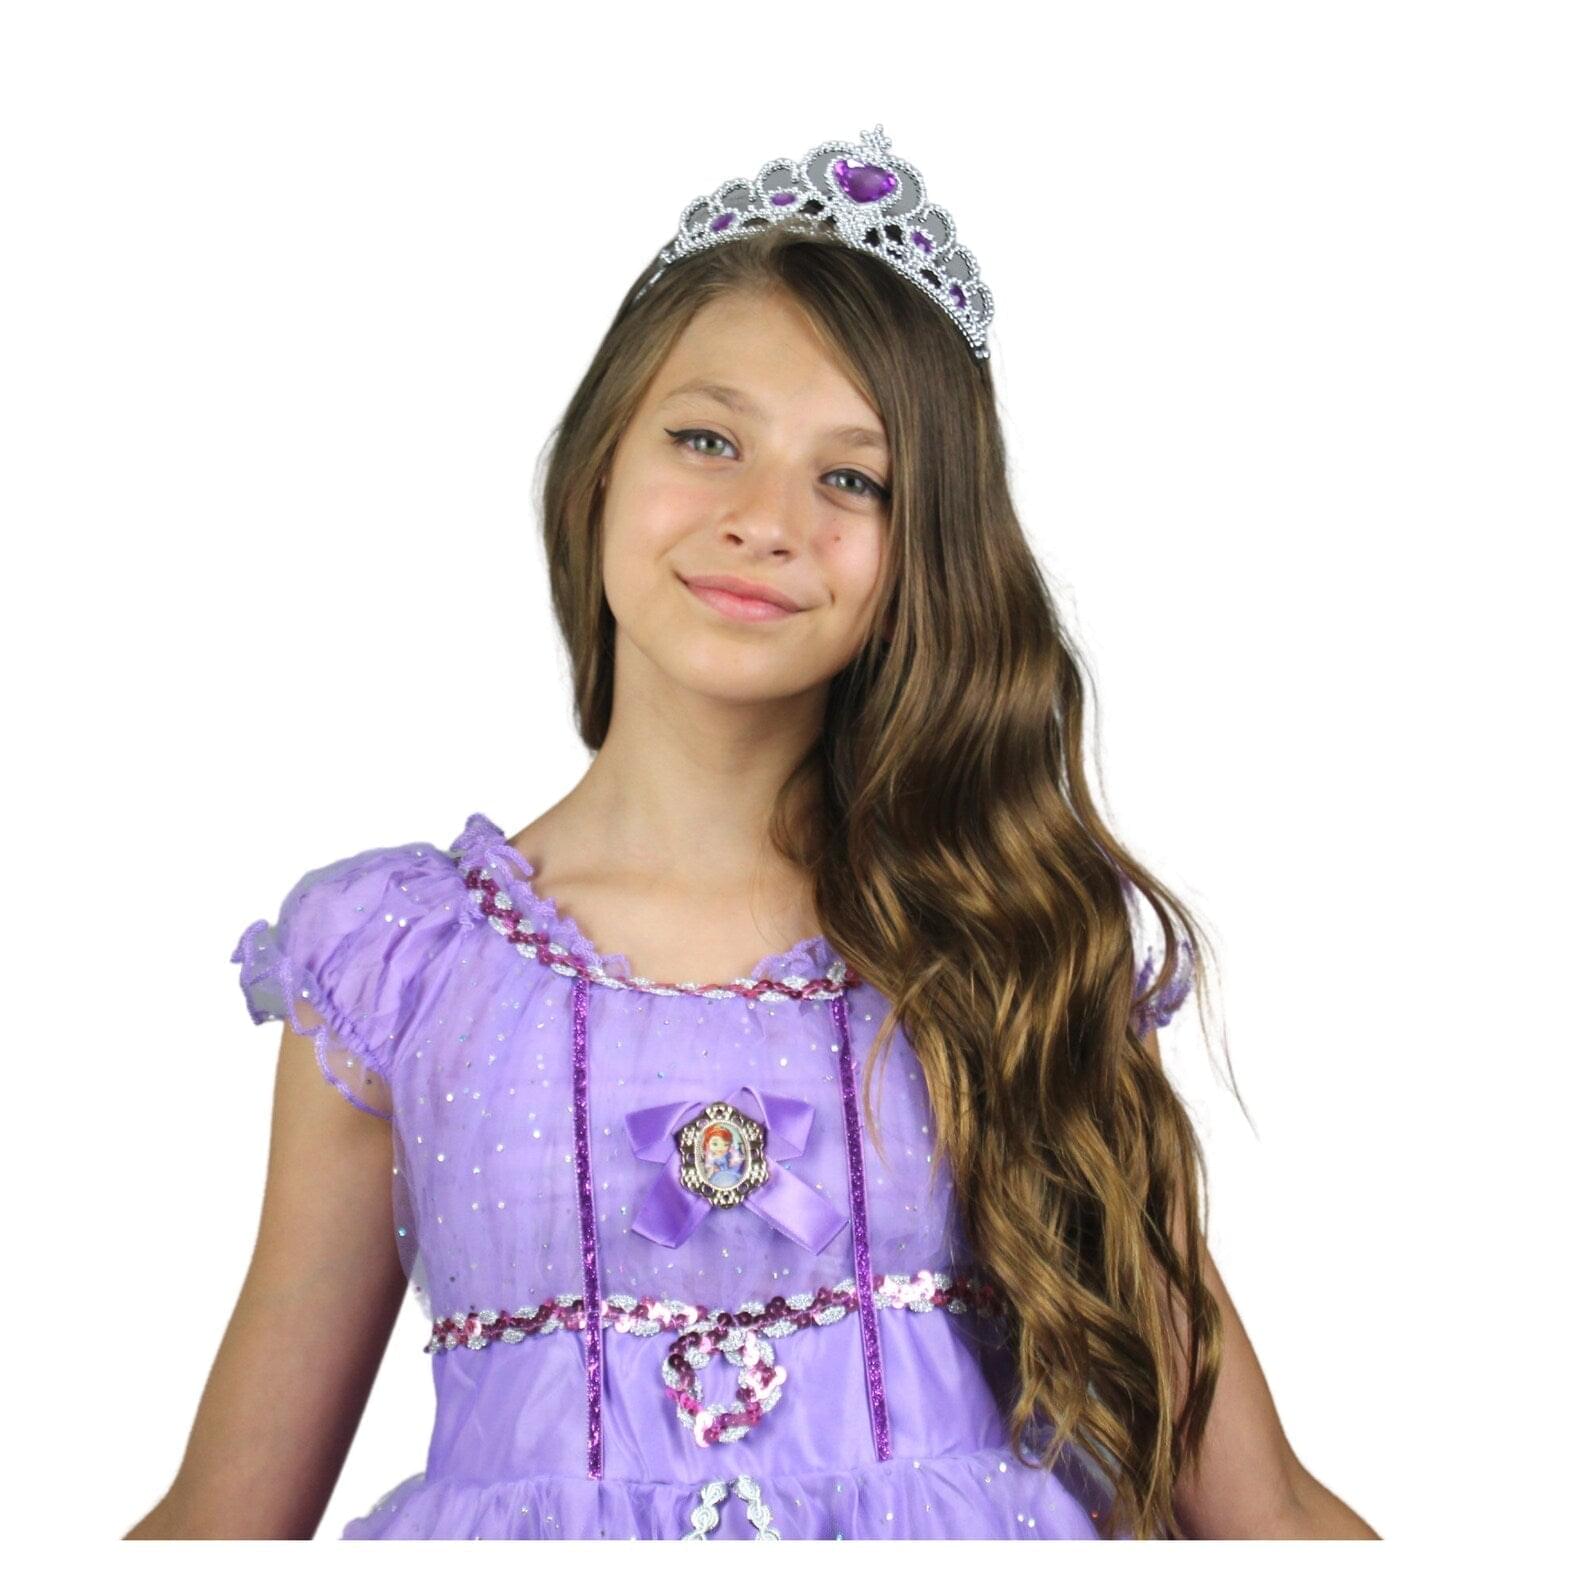 Disney-Inspired Sofia the First Birthday Dress for Little Princesses